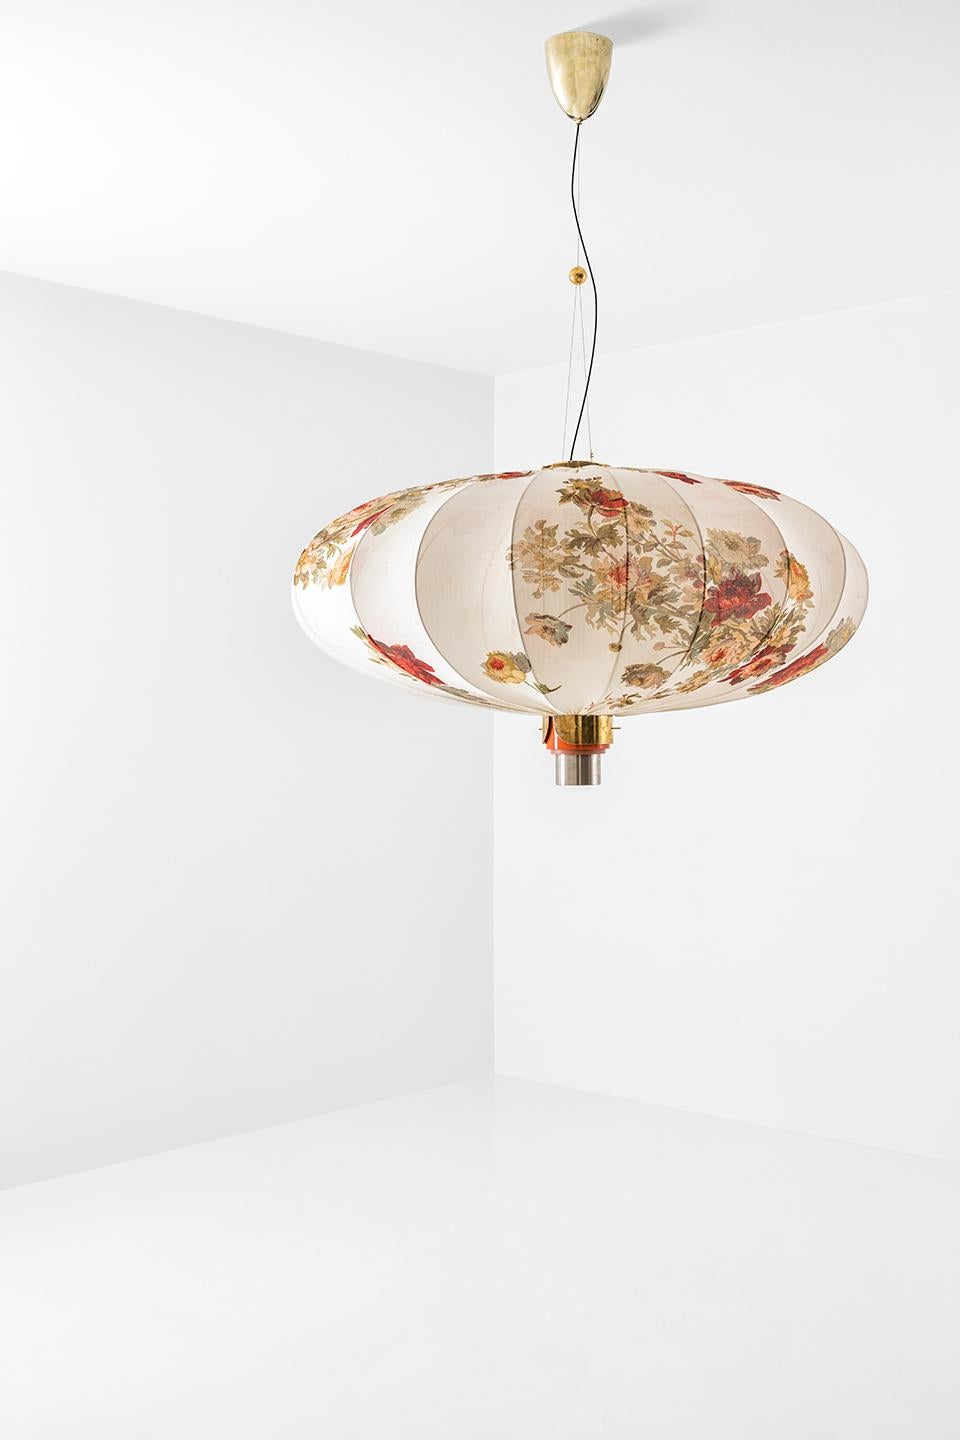 Ceiling lamp in natural brass covered with printed silk. Decorative details in brass and painted metal.
Ribbed glass internal lampshade.
Dimoremilano collection by Dimorestudio.
code: LAMPADA108
22% VAT WILL BE ADDED ON EUROPEAN ORDERS